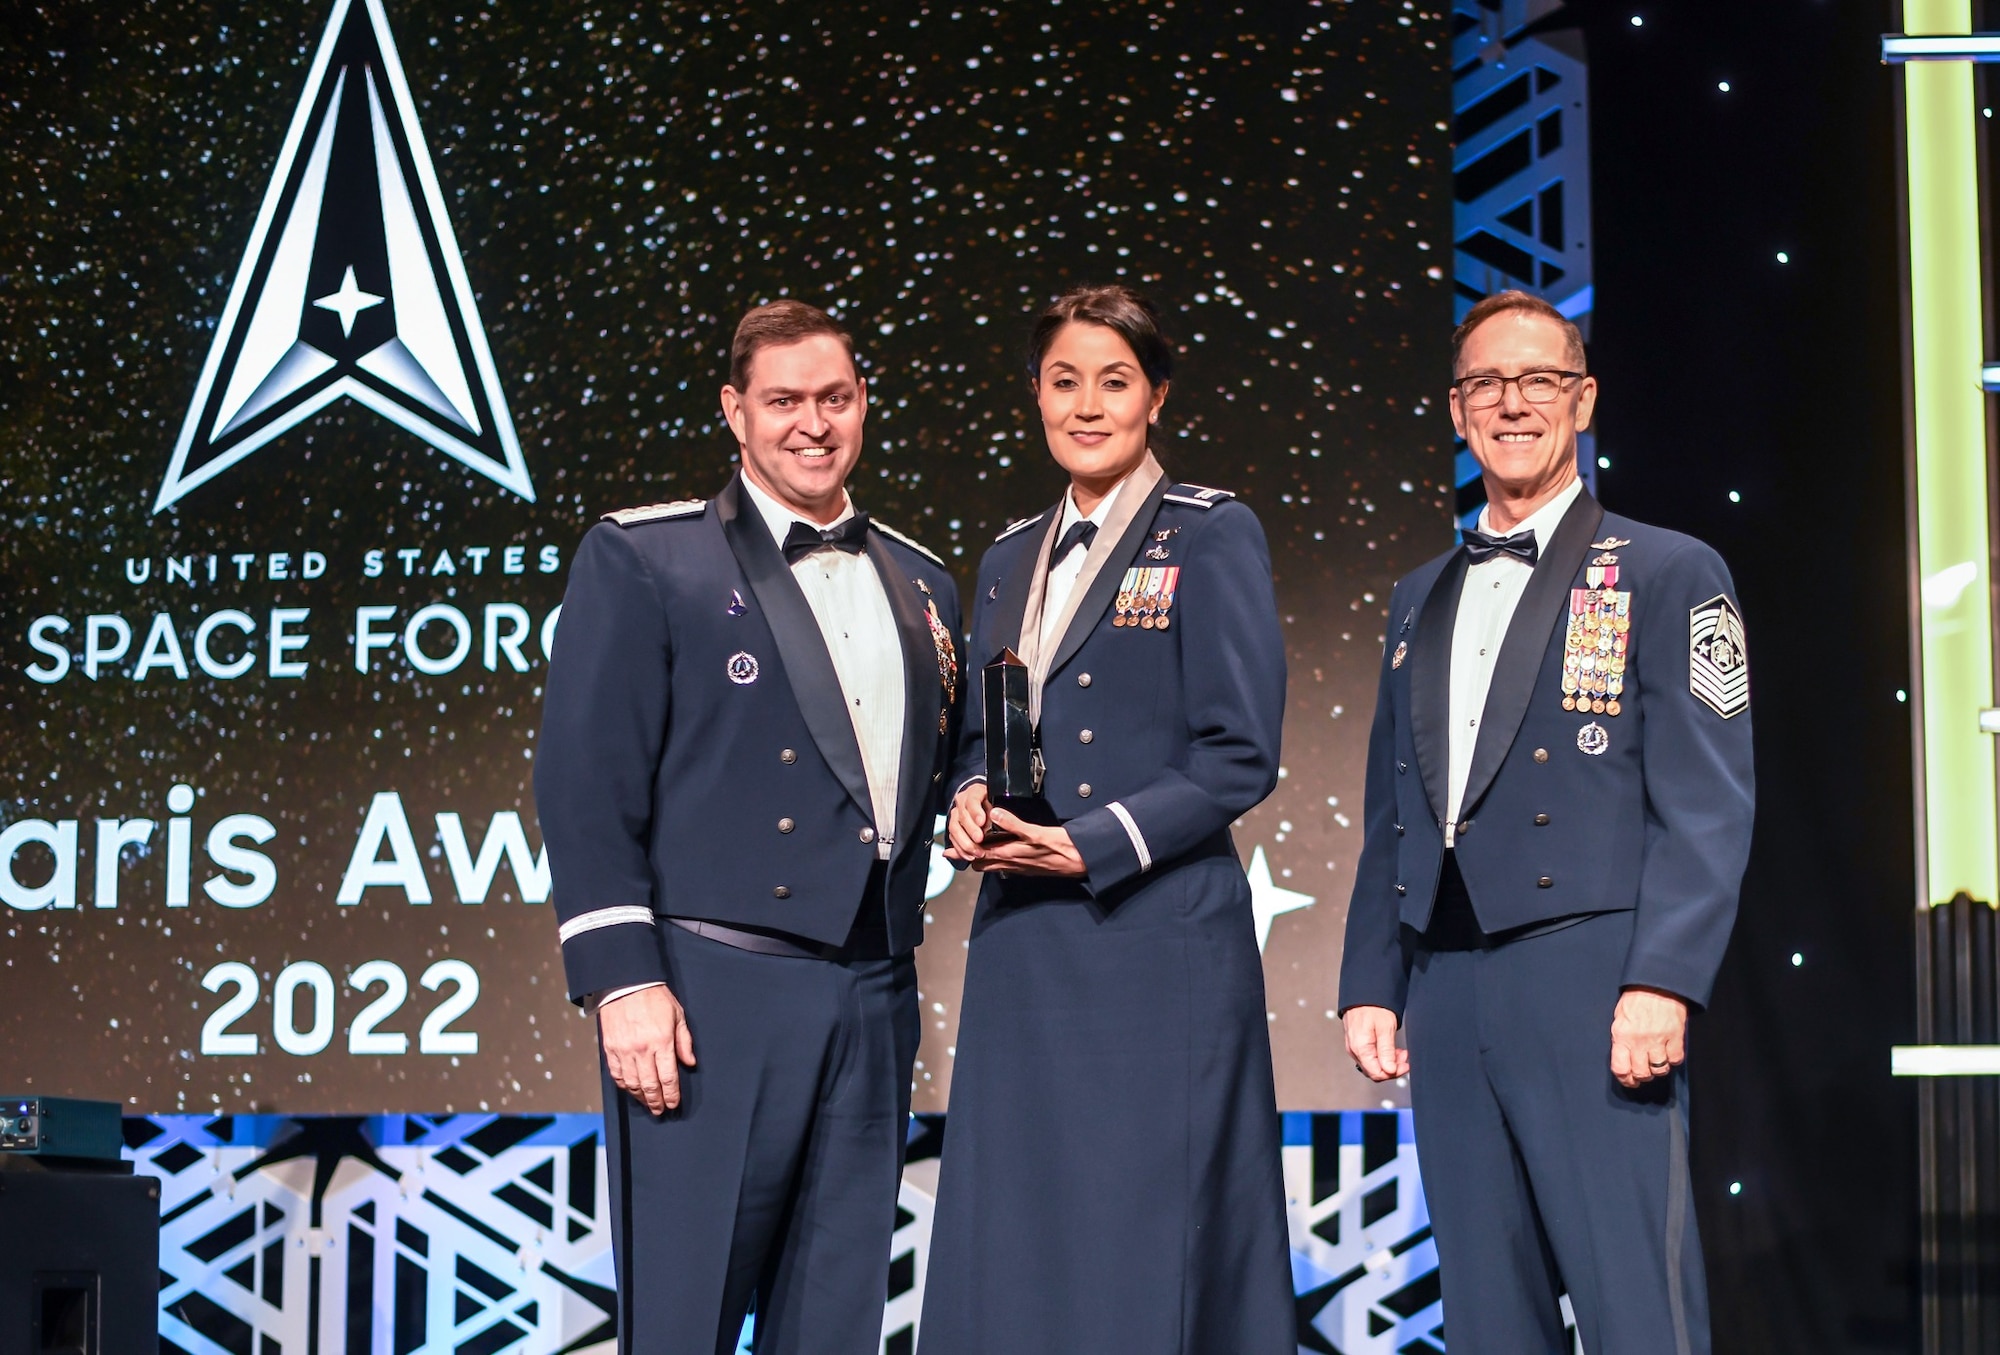 U.S. Space Force Capt. Victoria Garcia, Space Delta 3 chief of the mission planning cell, was awarded the first-ever U.S. Space Force annual Polaris Award for Courage at Vandenberg Space Force Base, California, Nov. 18, 2022.